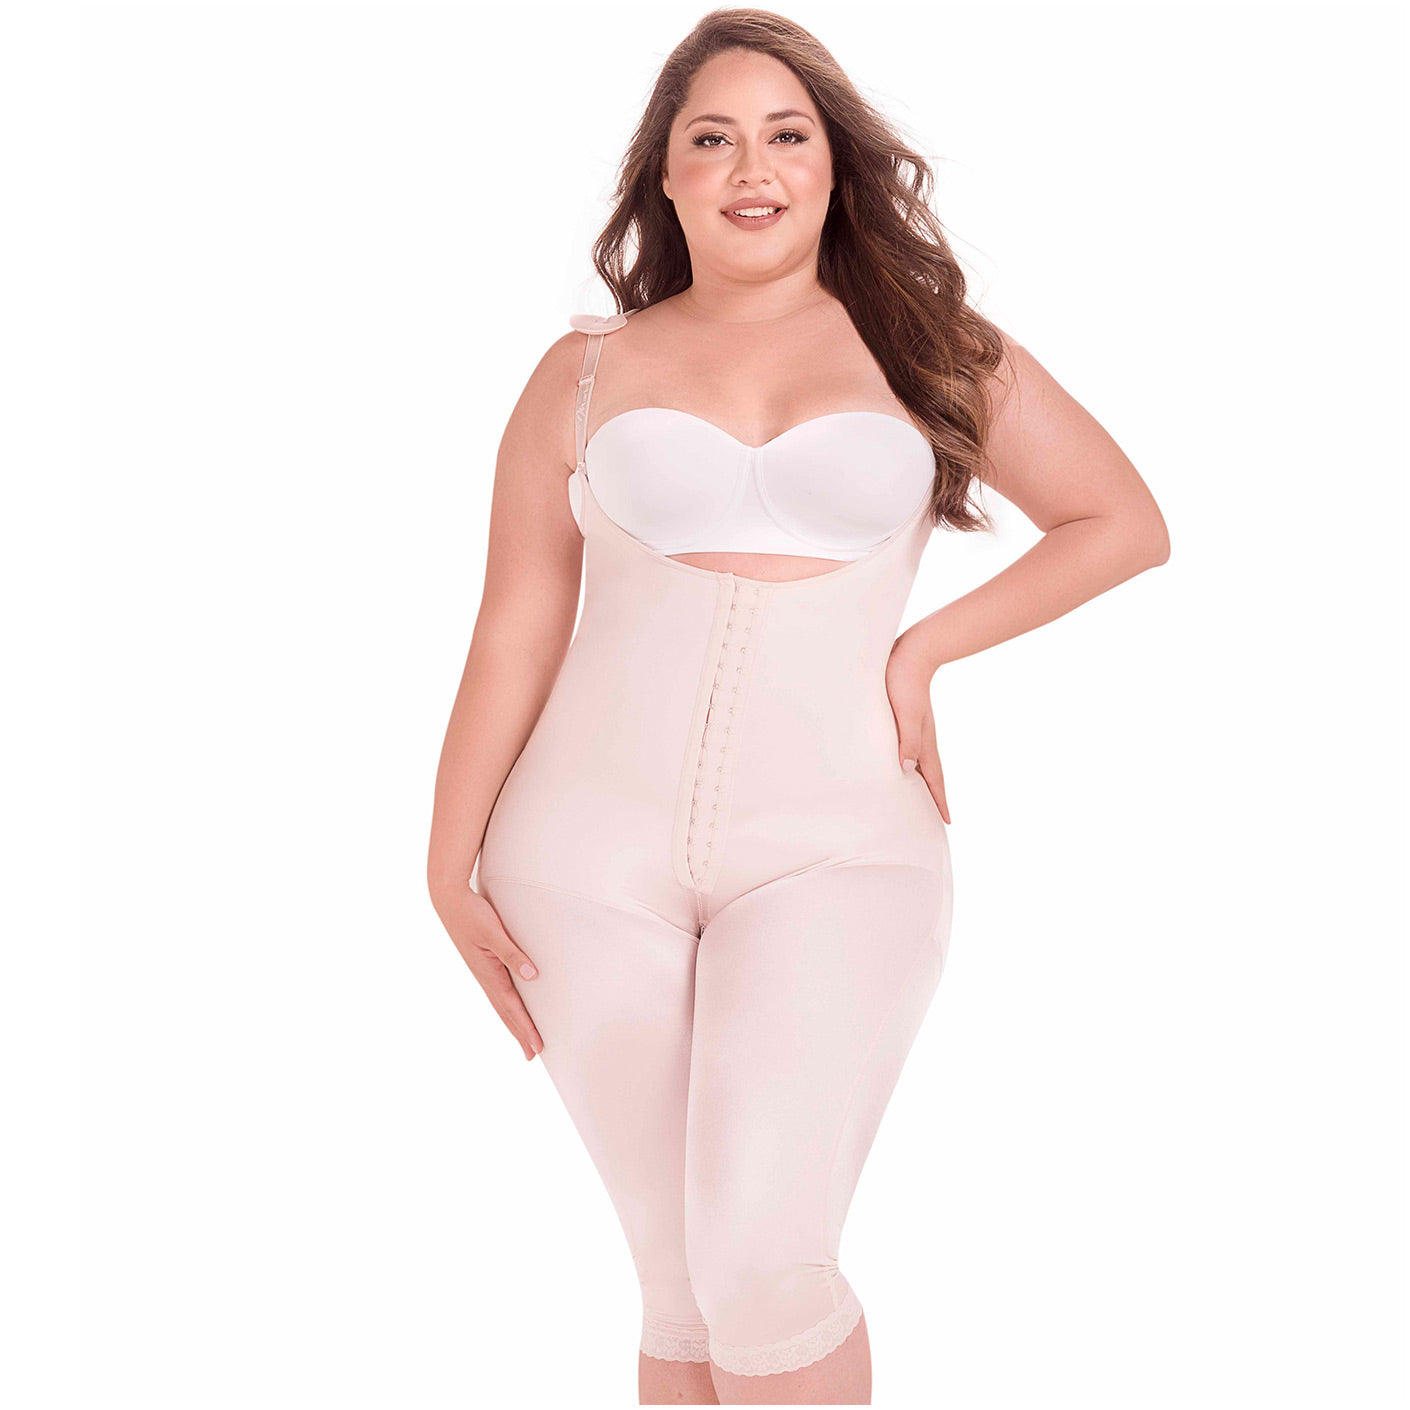 Fajas MariaE 9702 | Postsurgical Full Body Shaper | Open Bust with Front Closure